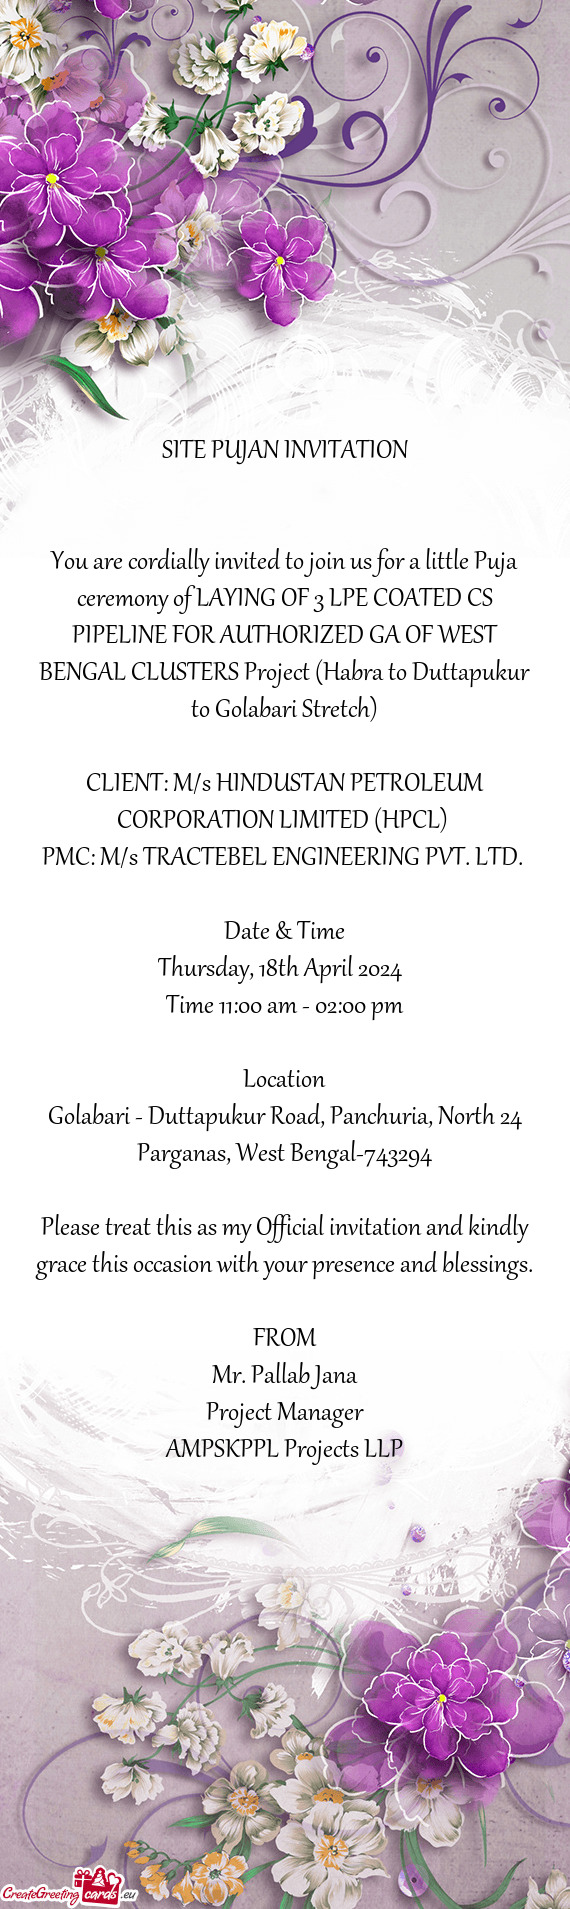 You are cordially invited to join us for a little Puja ceremony of LAYING OF 3 LPE COATED CS PIPELIN